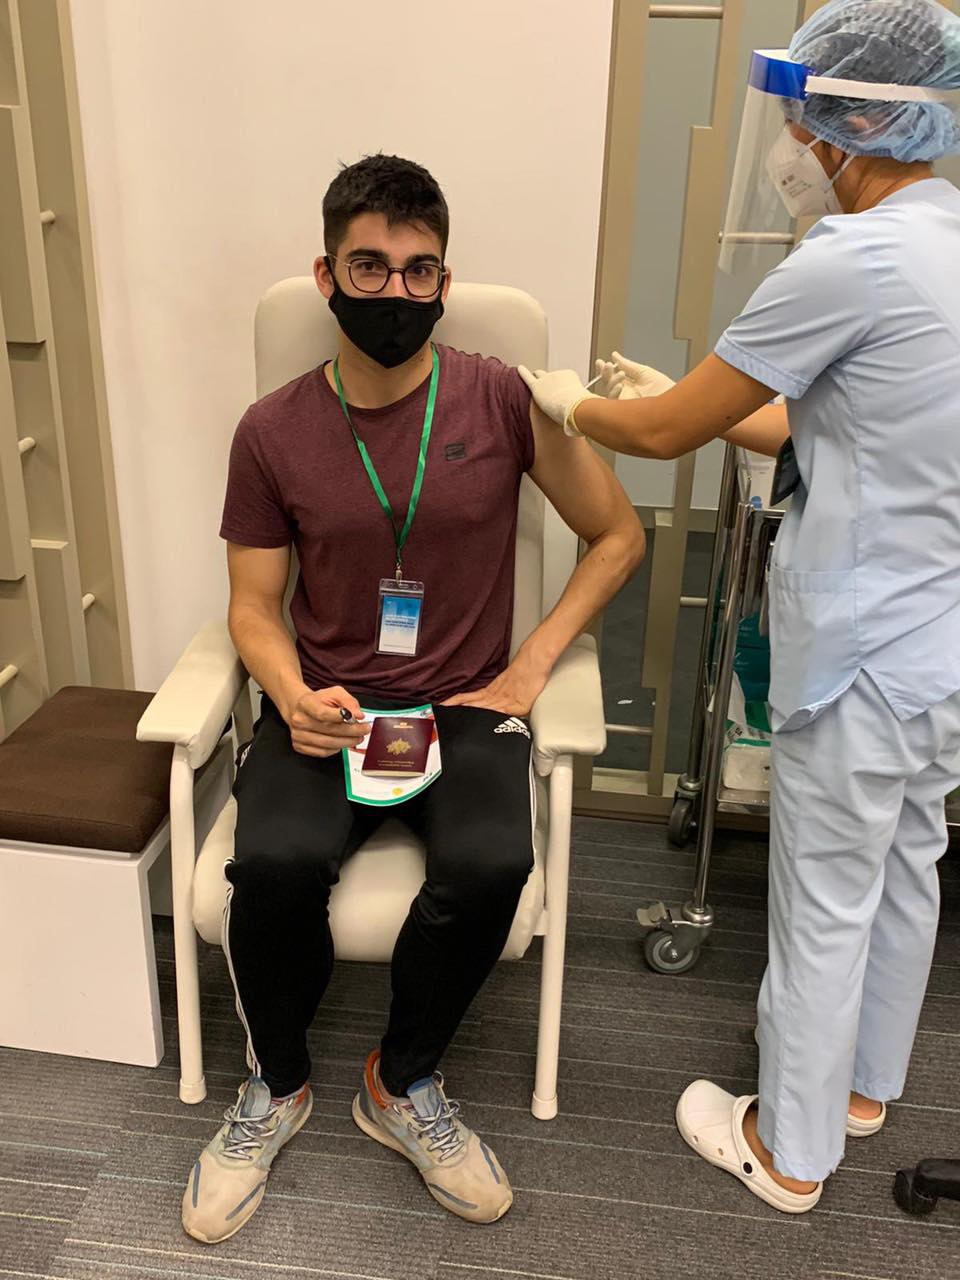 Hugo Blin is getting a Moderna jab against COVID-19 at FV Hospital through a vaccination campaign run by the French Consulate General in Ho Chi Minh City on July 27, 2021. Photo provided by Blin